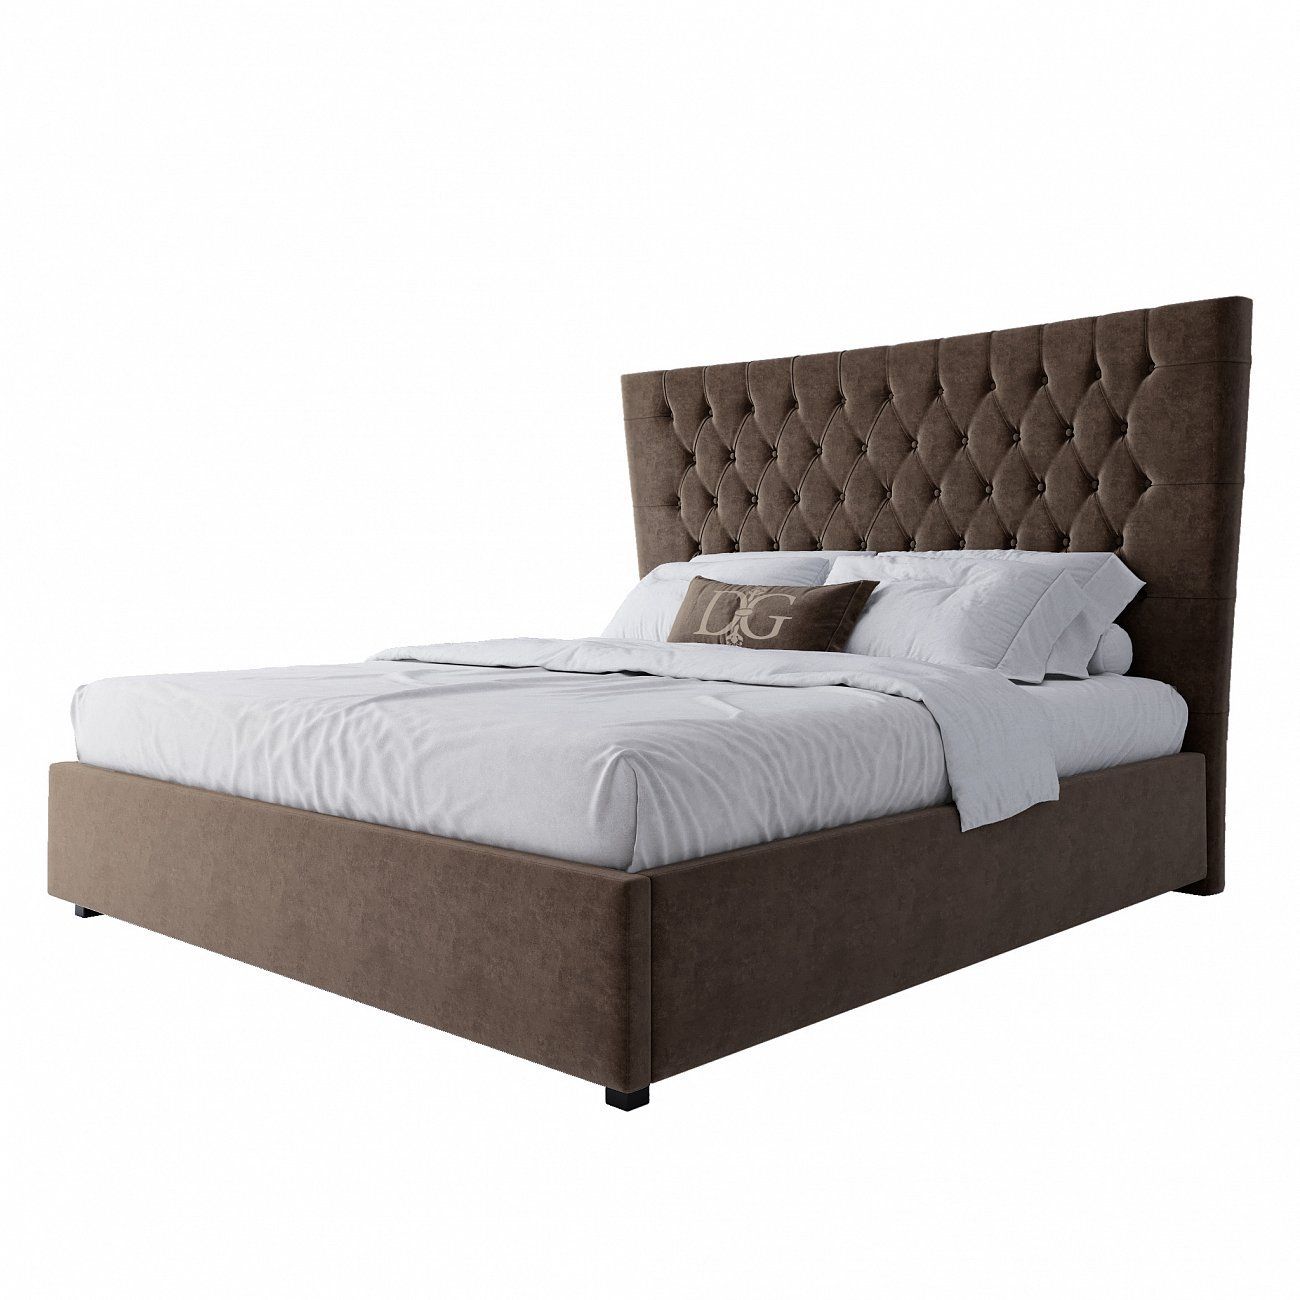 Double bed 180x200 brown velour QuickSand